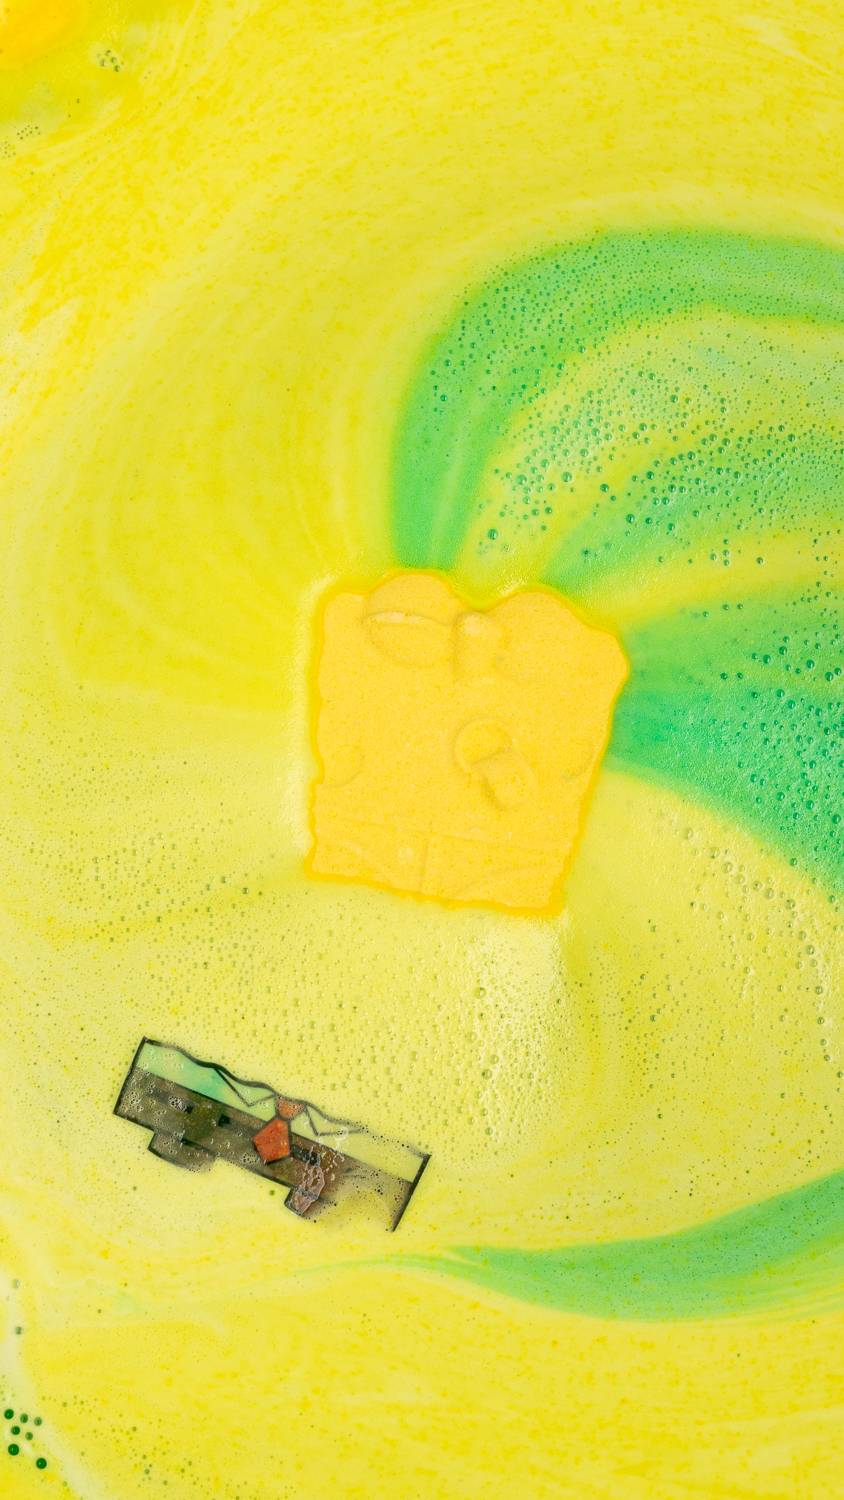 Spongebob bath bomb sits among bright swirls of green and yellow. Rice paper clothes can be seen floating.